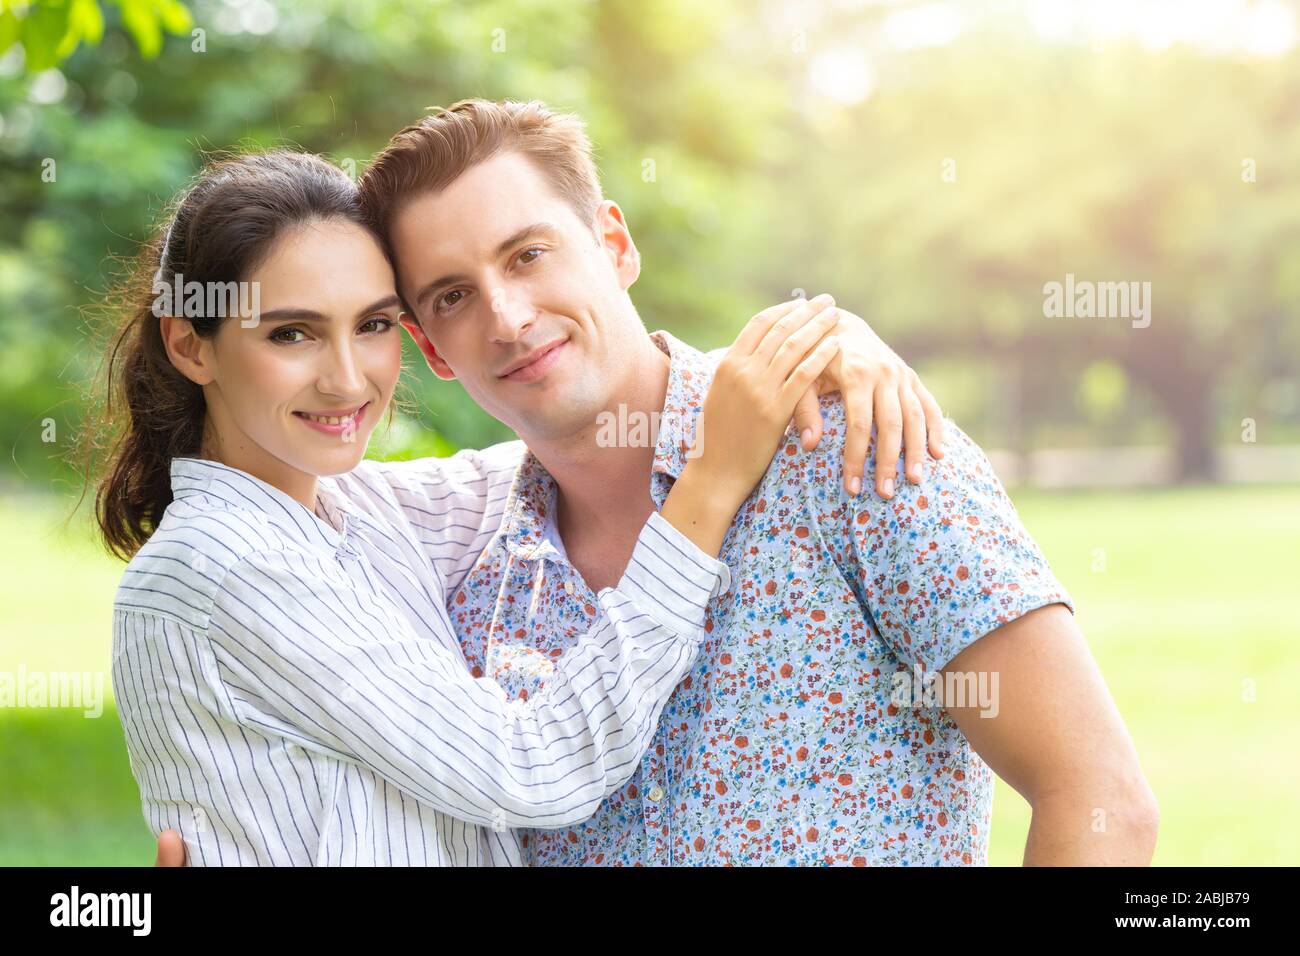 Portrait of Couple lover smiling looking camera outdoor park background with copy space. Stock Photo